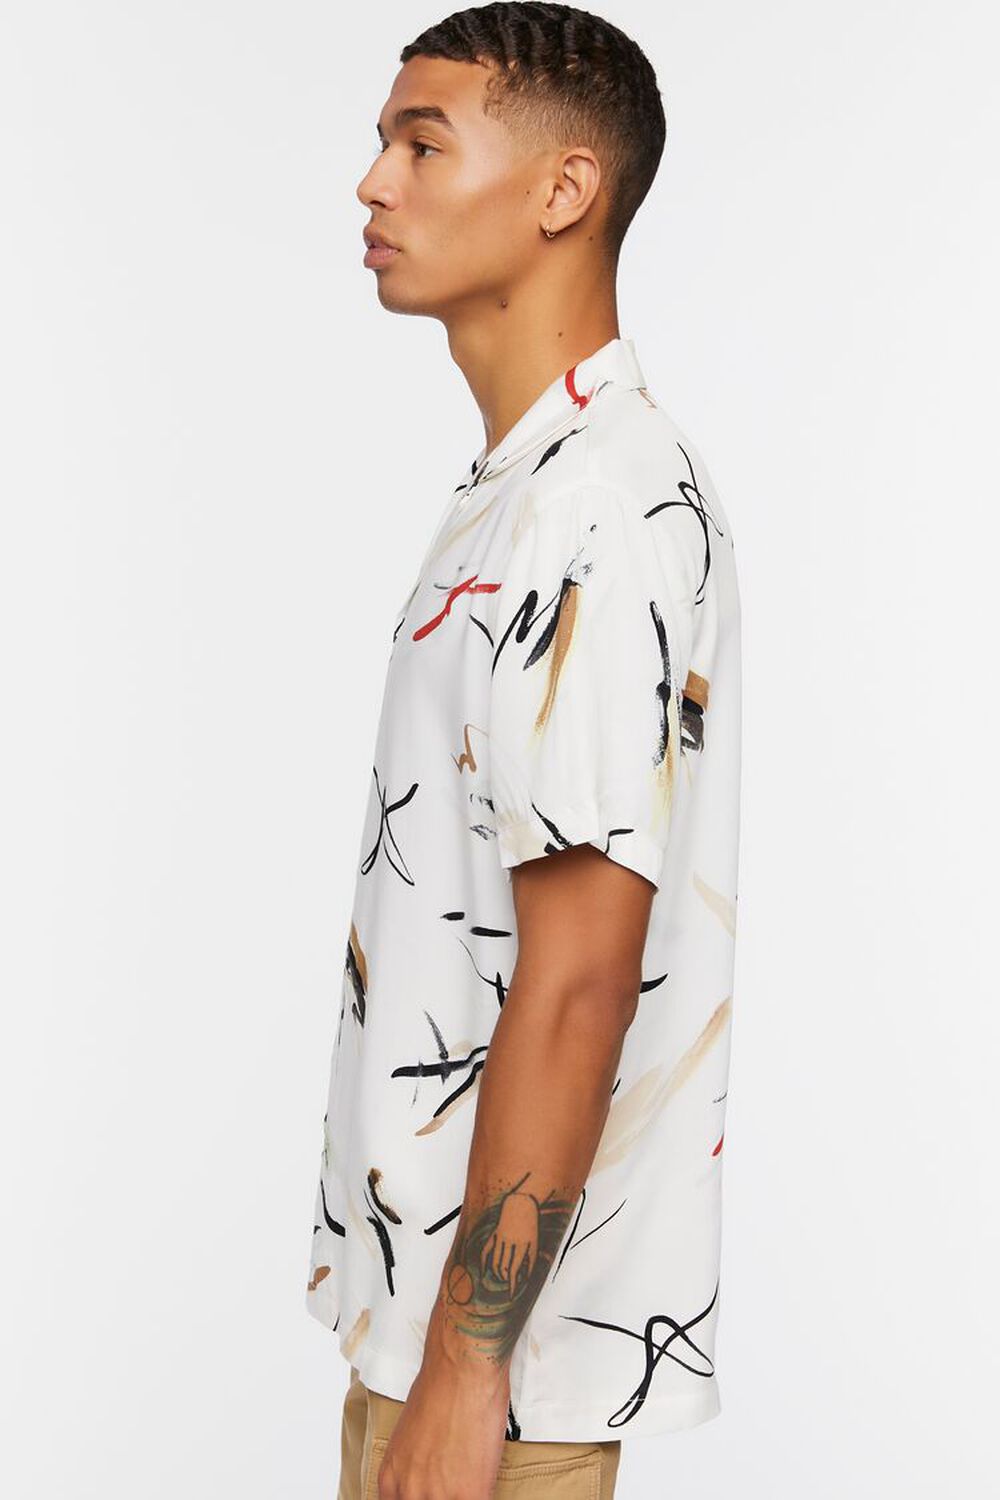 WHITE/MULTI Abstract Paint Stroke Print Shirt, image 2